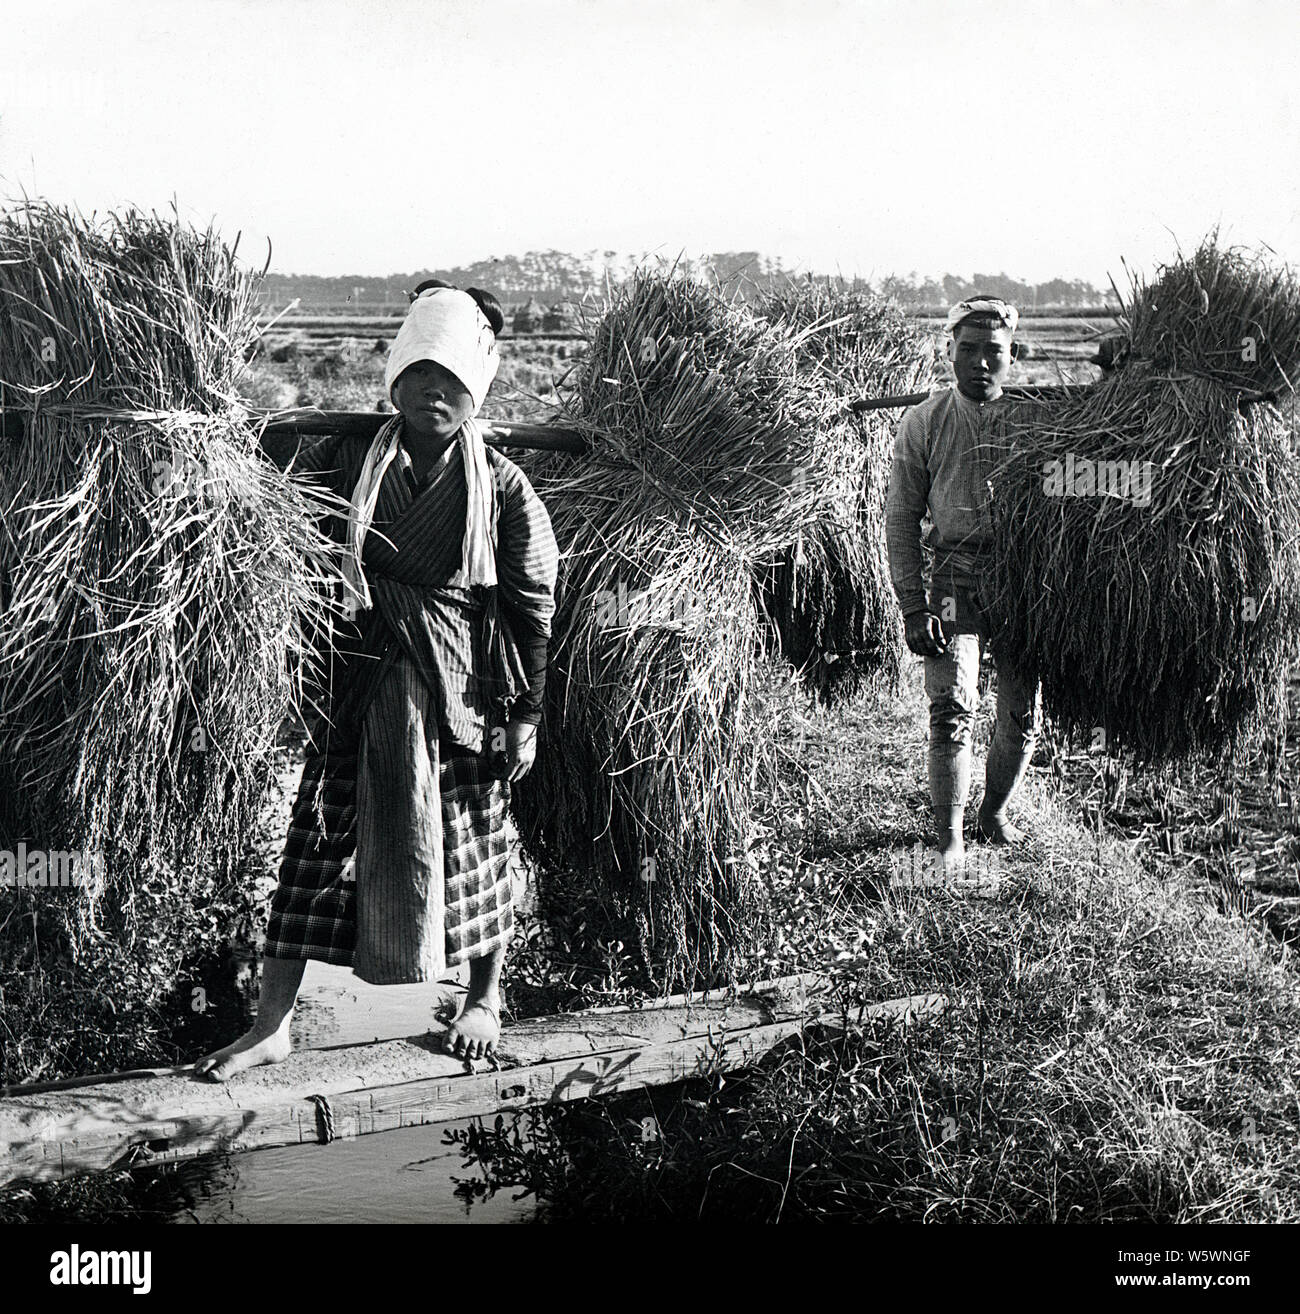 1900s-japan-japanese-farmers-harvesting-rice-a-farmer-and-his-wife-are-carrying-home-the-rice-harvest-20th-century-vintage-glass-slide-W5WNGF.jpg